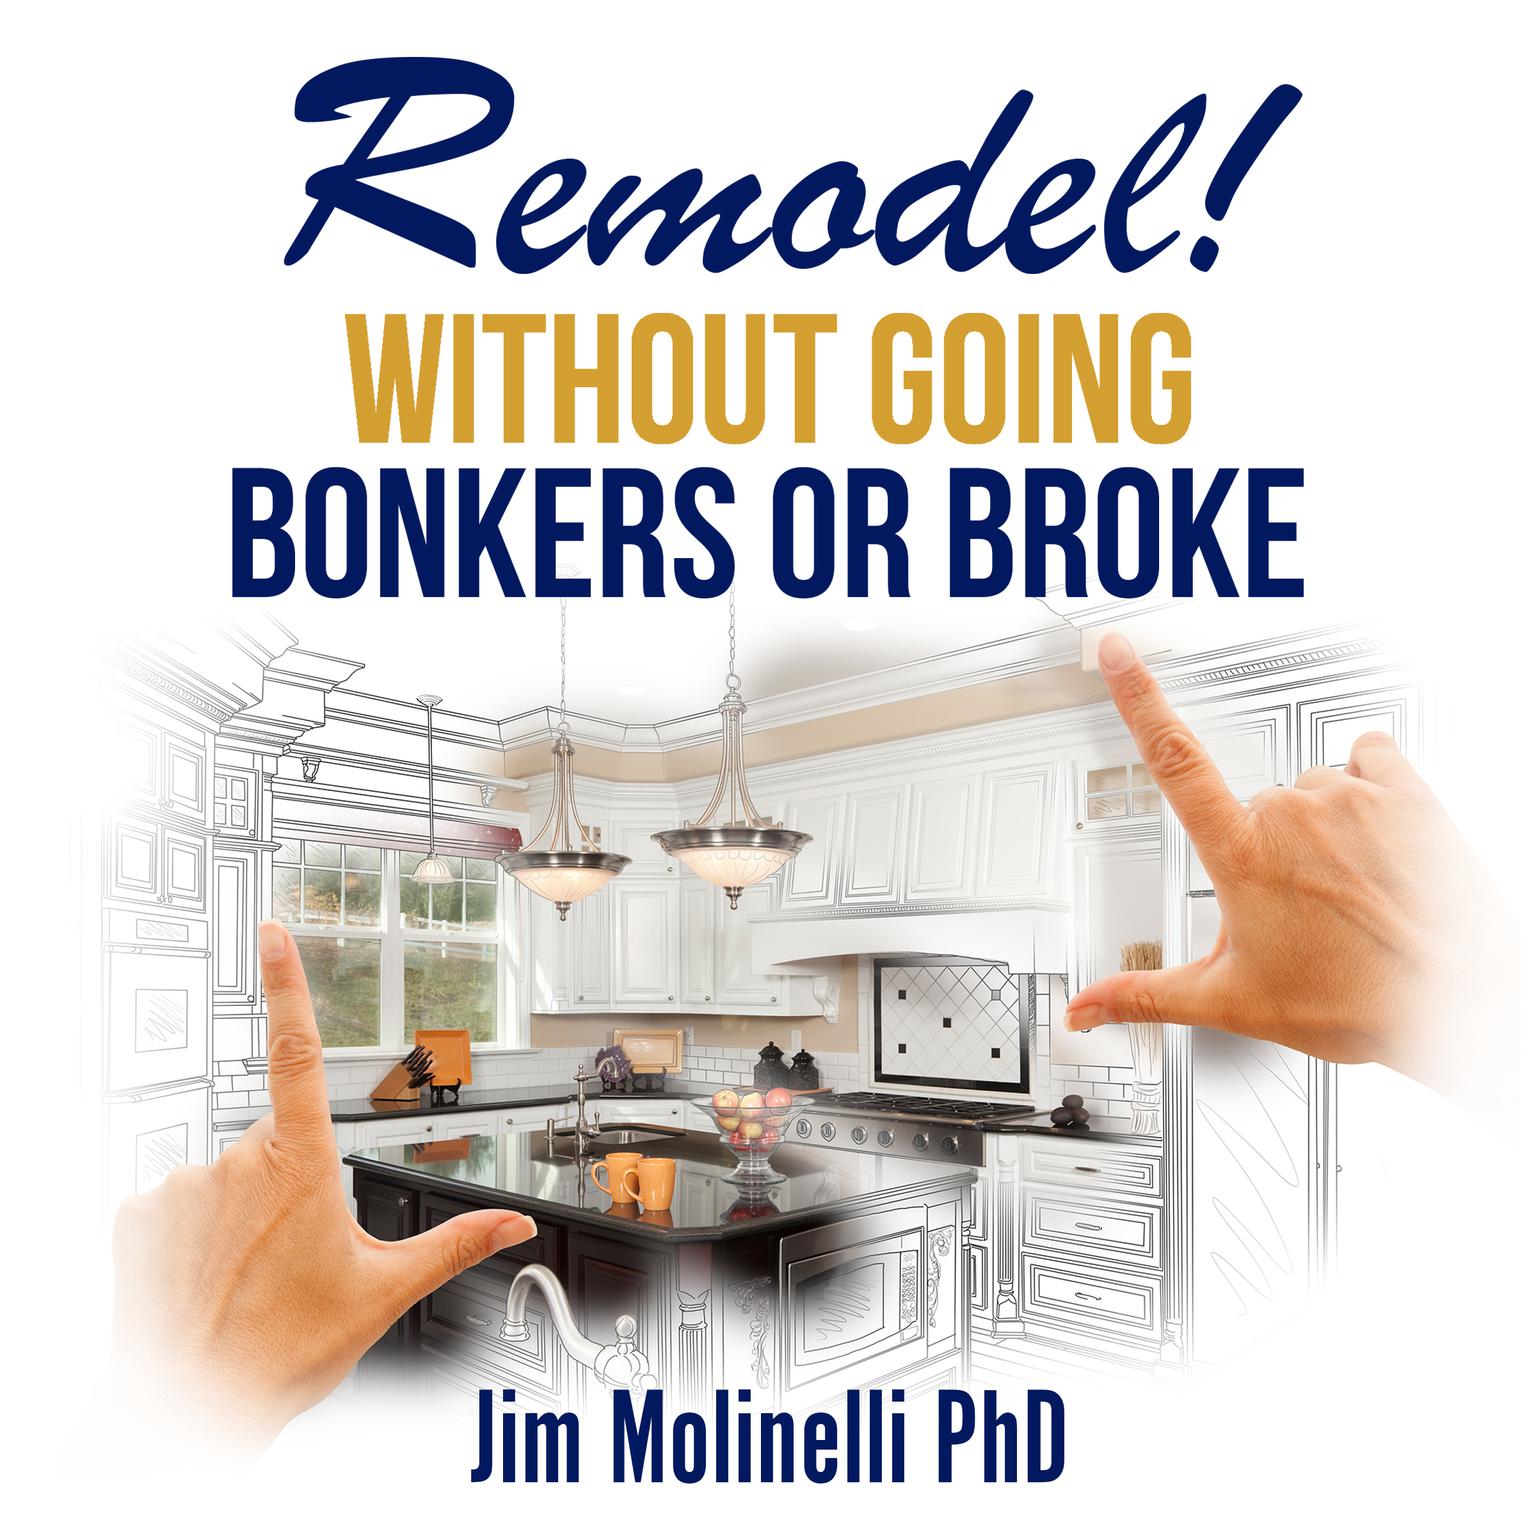 Remodel Without Going Bonkers or Broke Audiobook, by Jim Molinelli